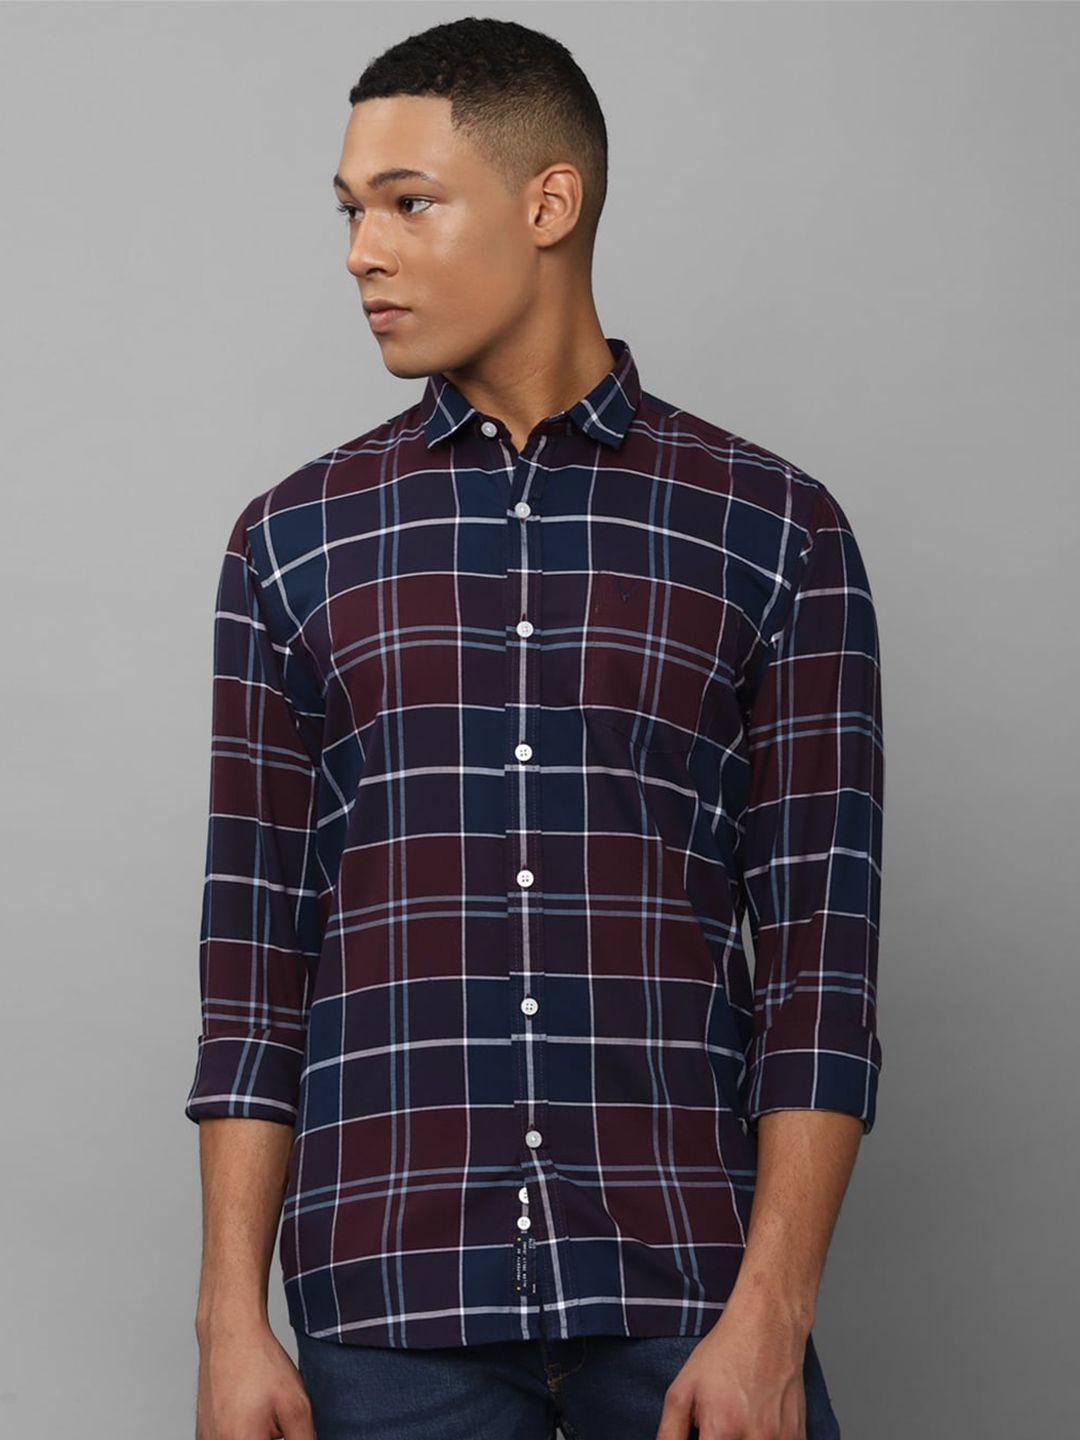 allen solly custom fit tartan checked pure cotton casual shirt